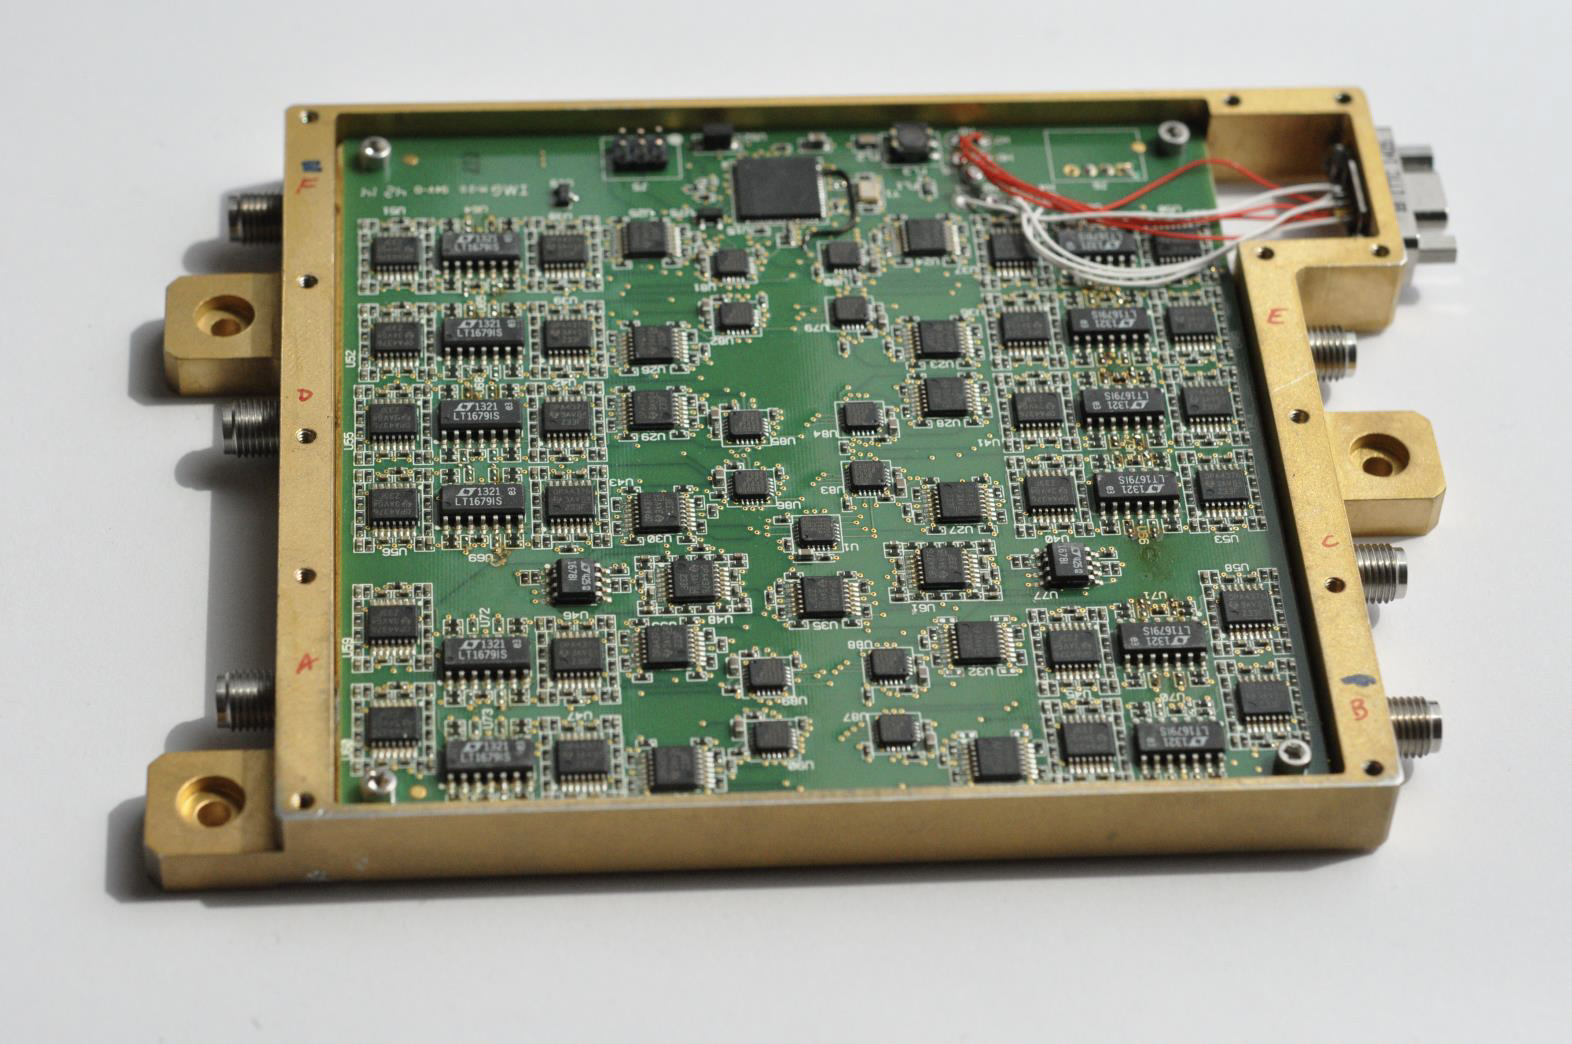 A mixed-signal printed circuit board for the intermediate frequency processor module developed as part of the ACT project (Image credit: W. Blackwell, MIT)